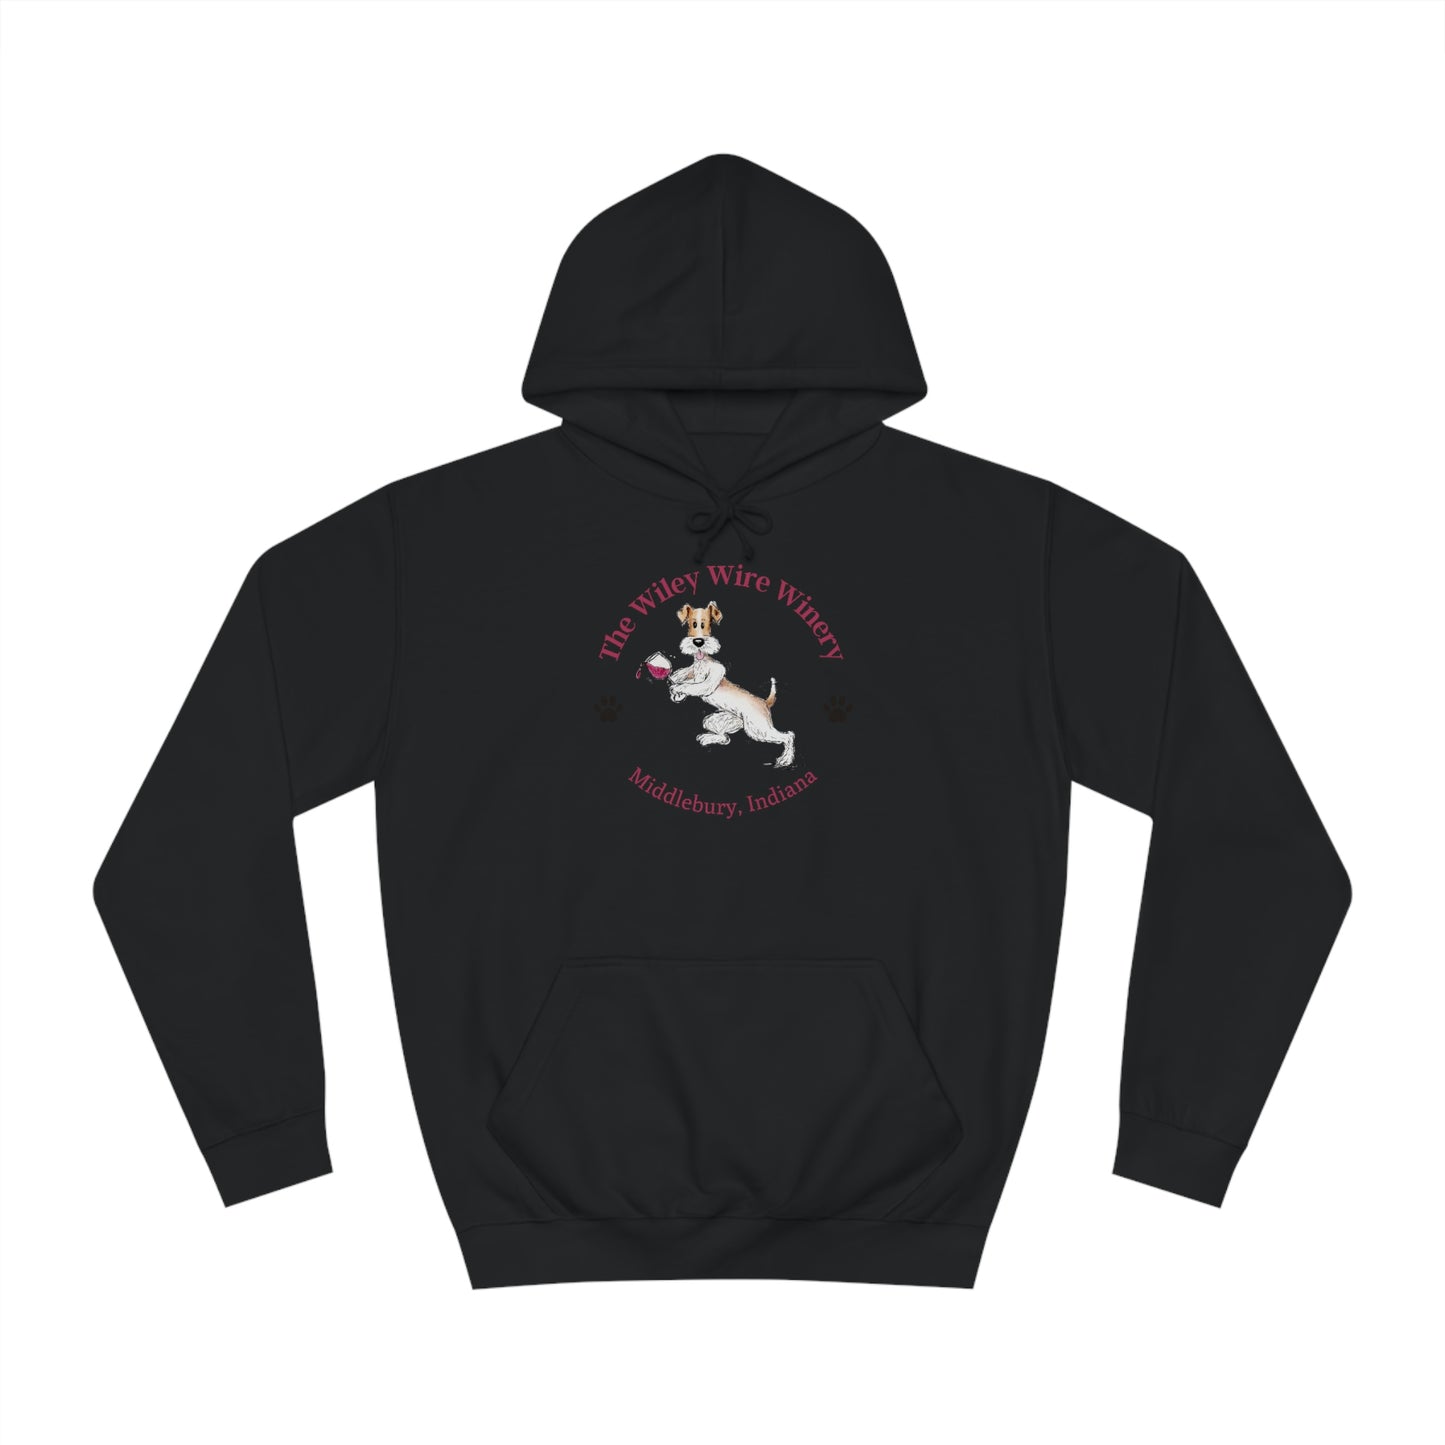 Wiley Wire Winery Hoodie